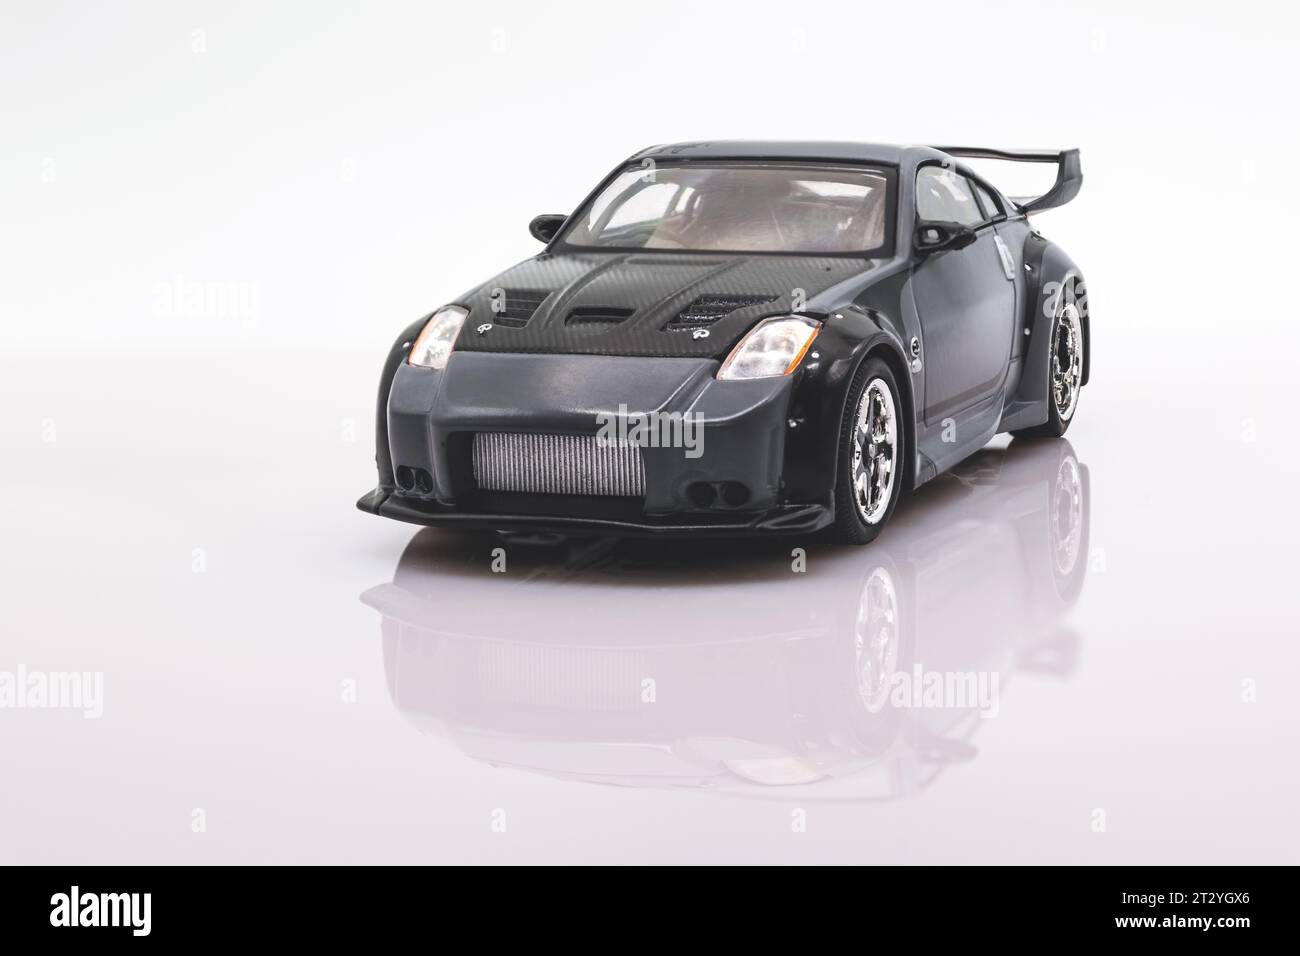 Fast&Furious Nissan Fairlady Z (Z33) 1:43 model car, front view, white background with reflection Stock Photo